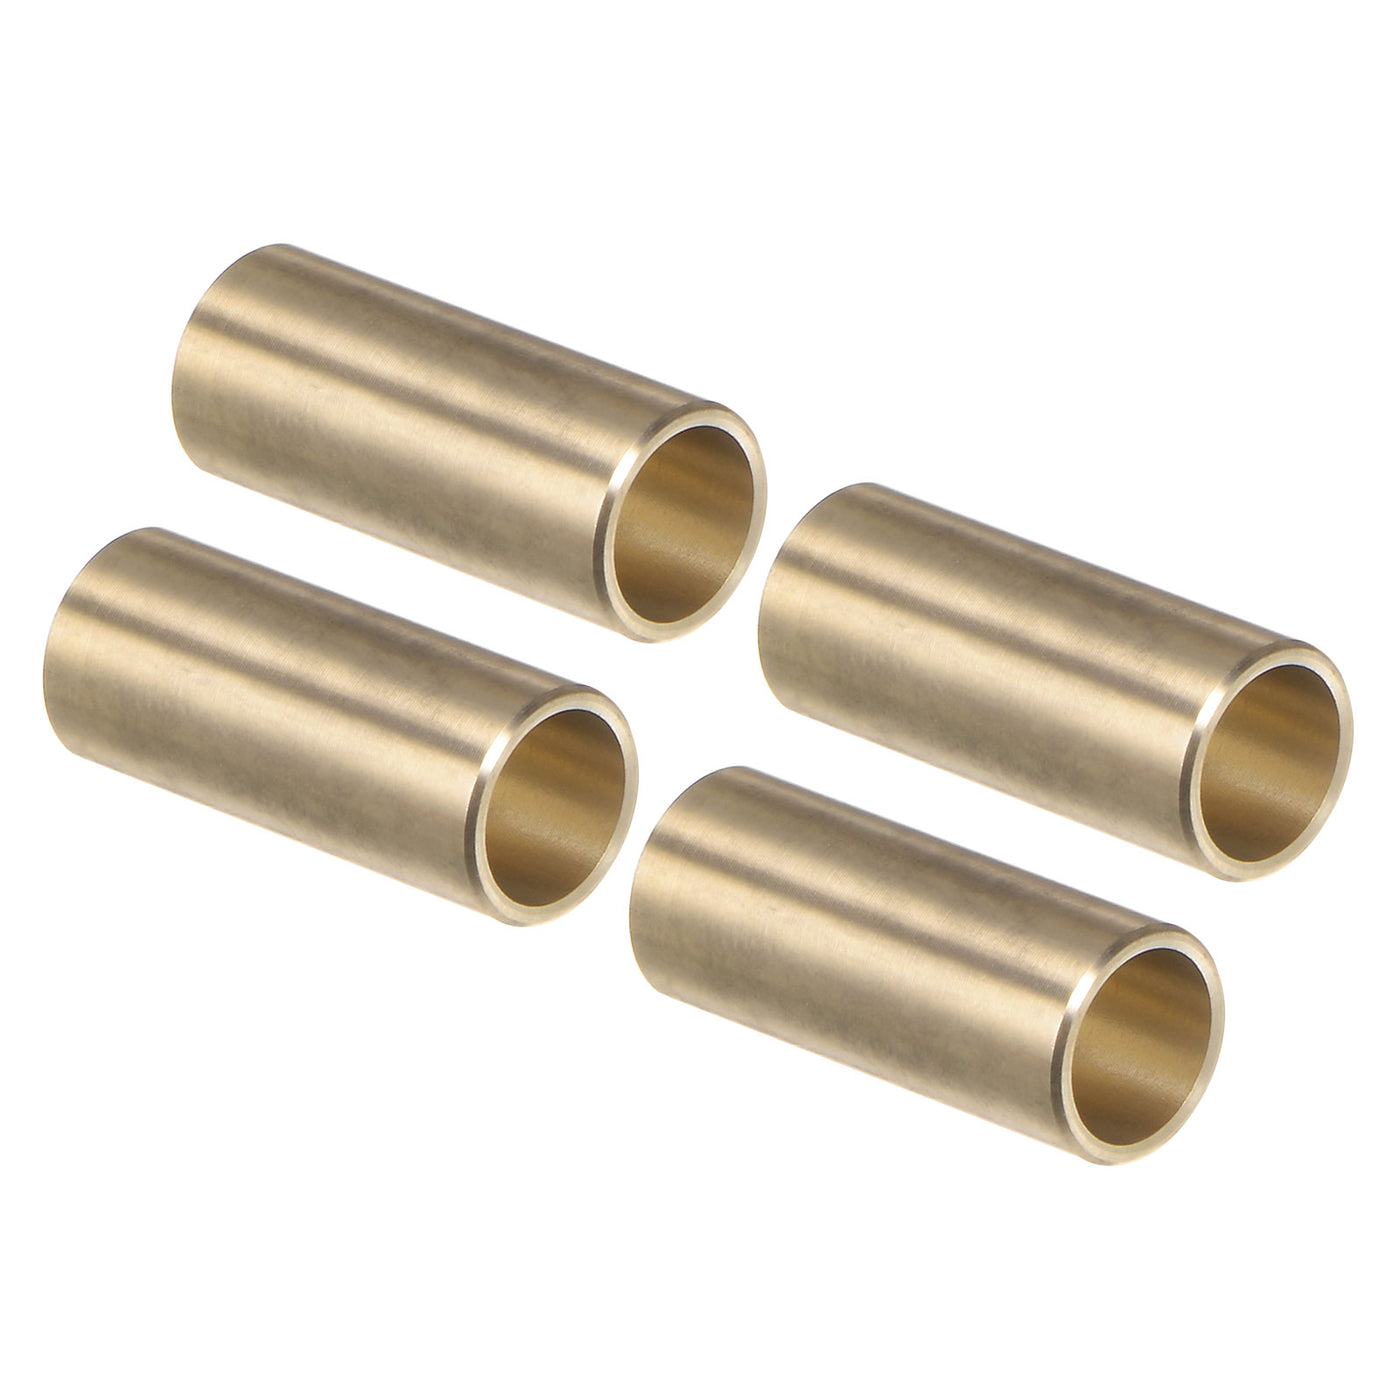 uxcell Uxcell 4pcs Sleeve Bearings 1/4" x 5/16" x 3/4" Wrapped Oilless Bushings Cast Brass